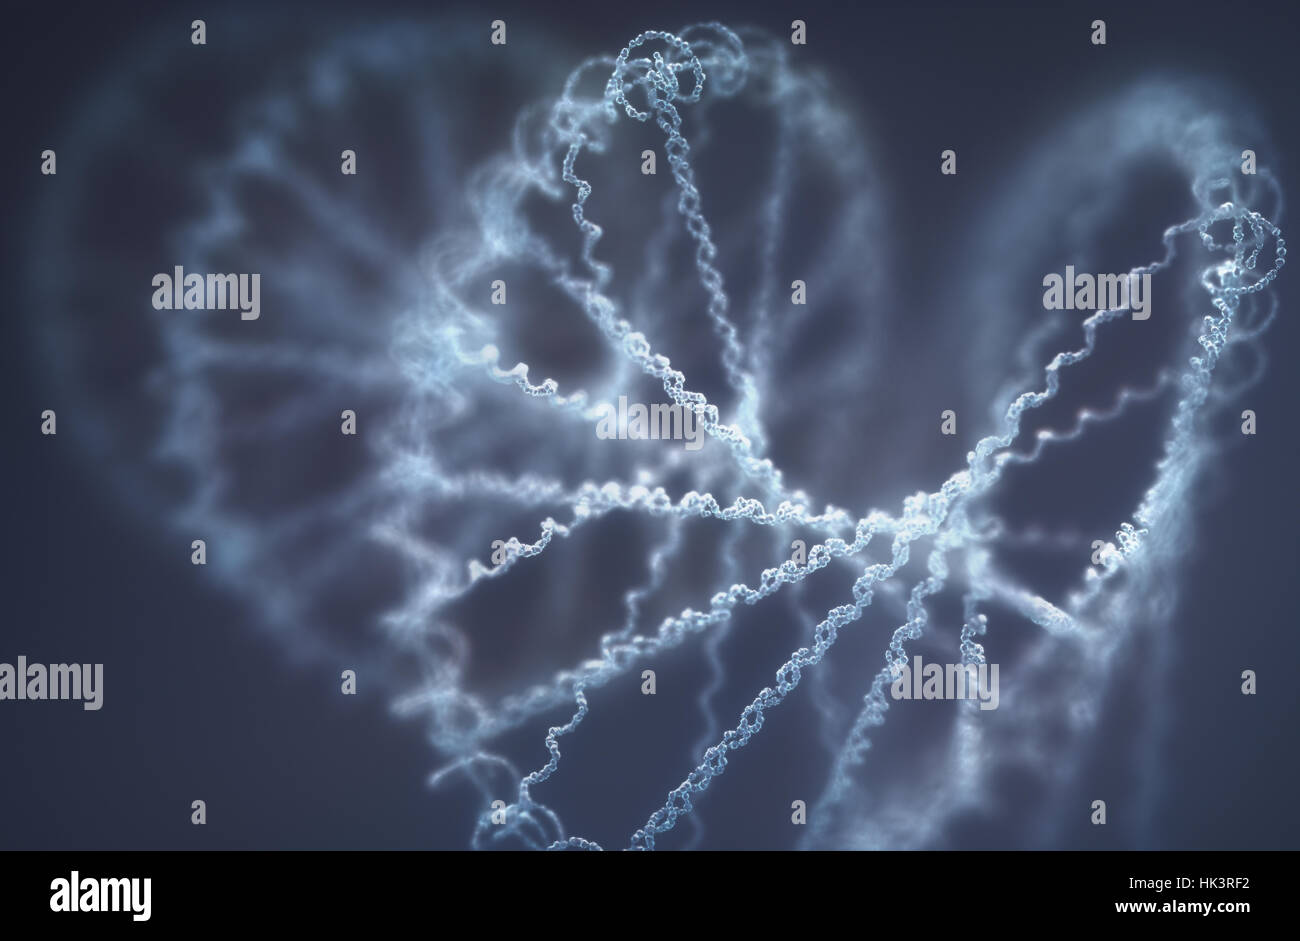 Deoxyribonucleic acid (DNA), molecule that carries the genetic instructions of the development, functioning and reproduction of all living organisms a Stock Photo